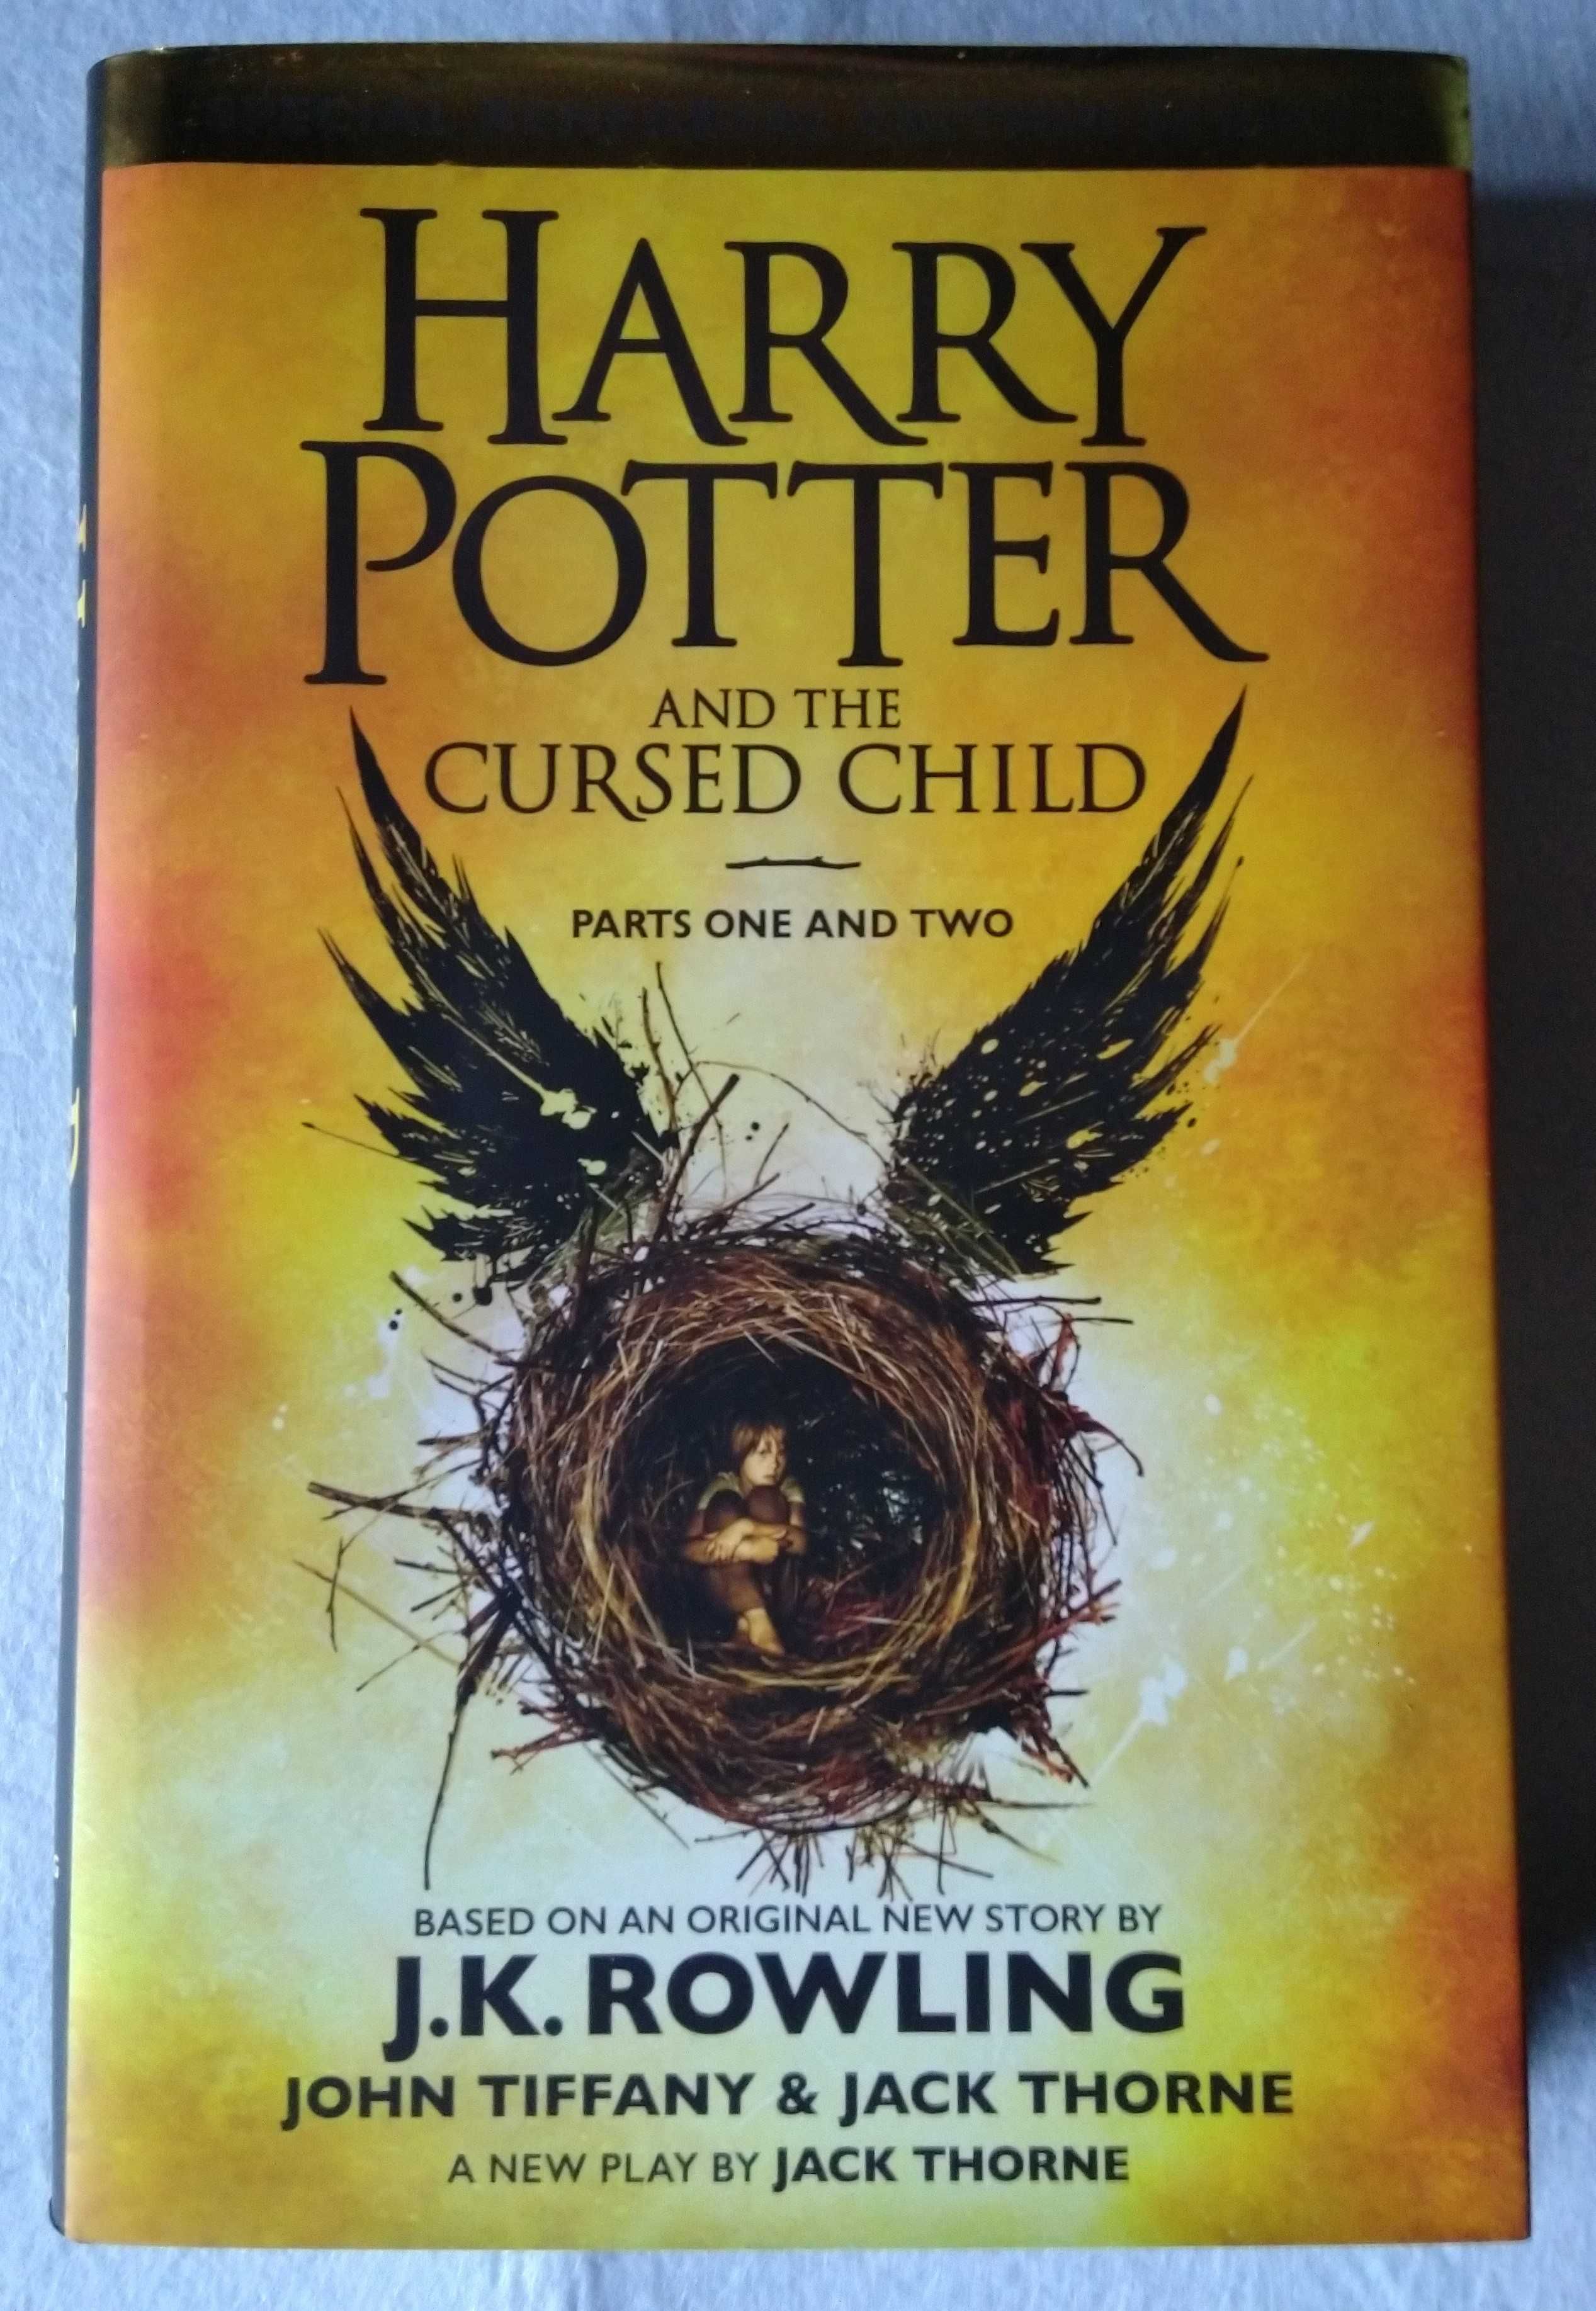 Harry Potter and the Cursed Child (Part One and Two)